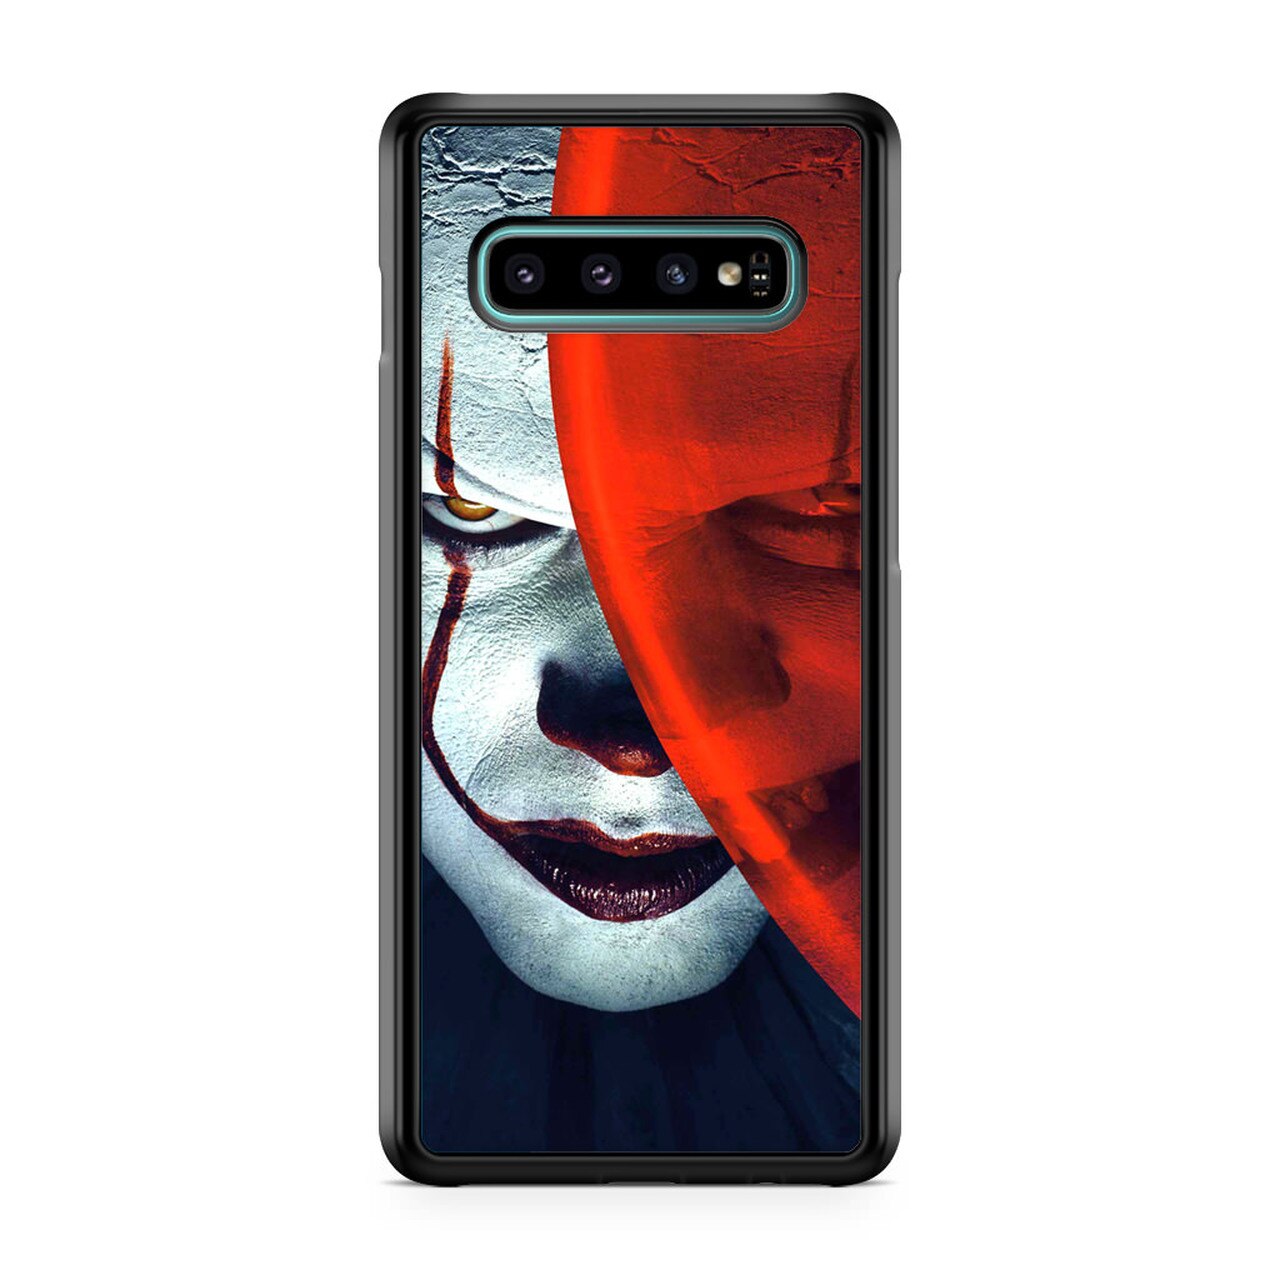 Pennywise Galaxy S10 Plus - HD Wallpaper 